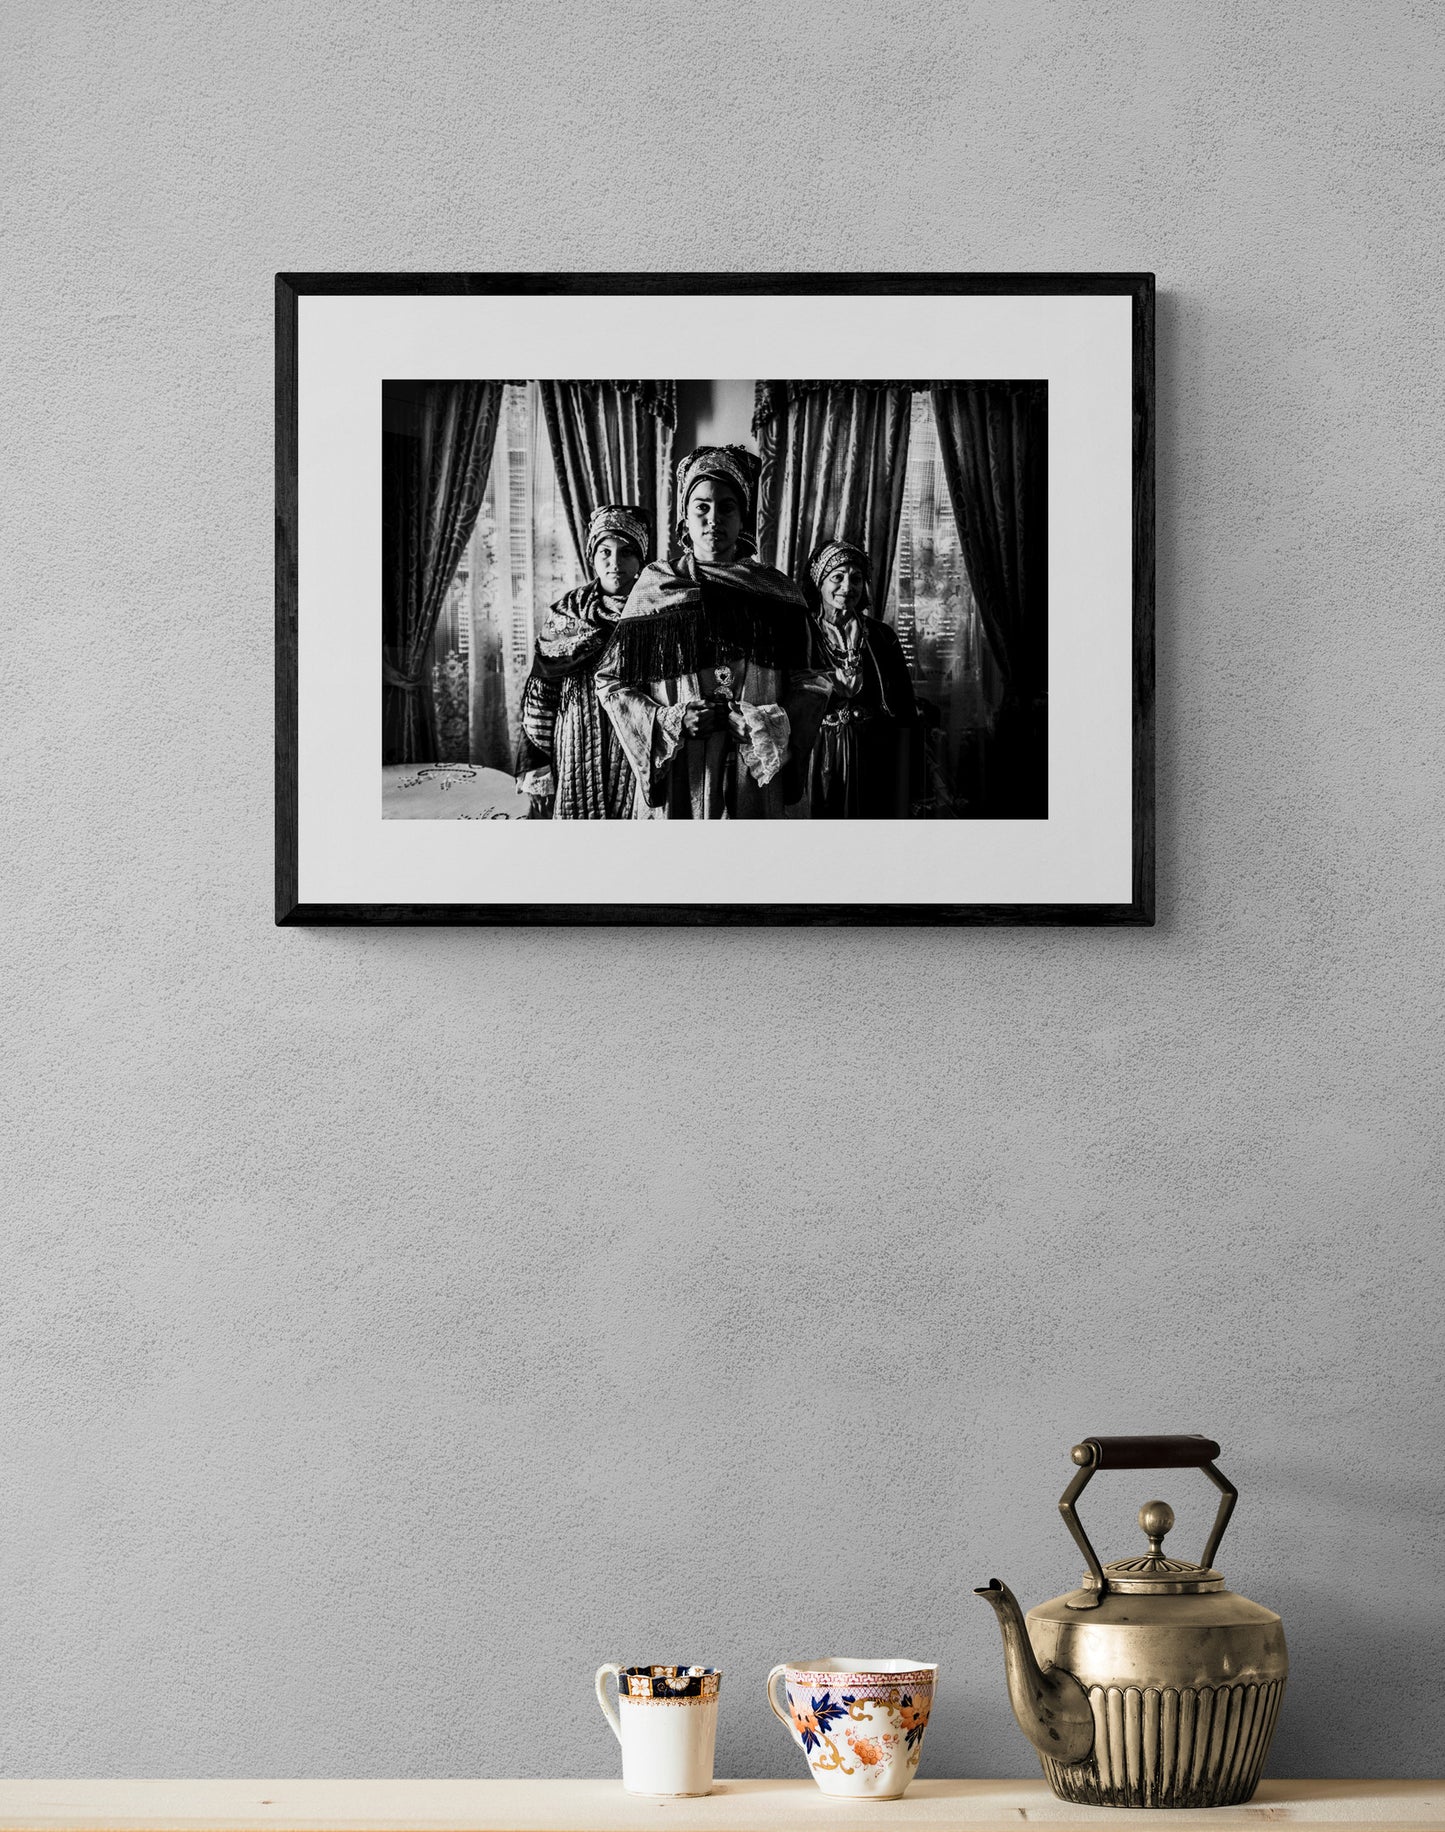 Black and White Photography Wall Art Greece | Three ladies in the traditional costumes of Symi island inside a house Dodecanese Greece by George Tatakis - single framed photo